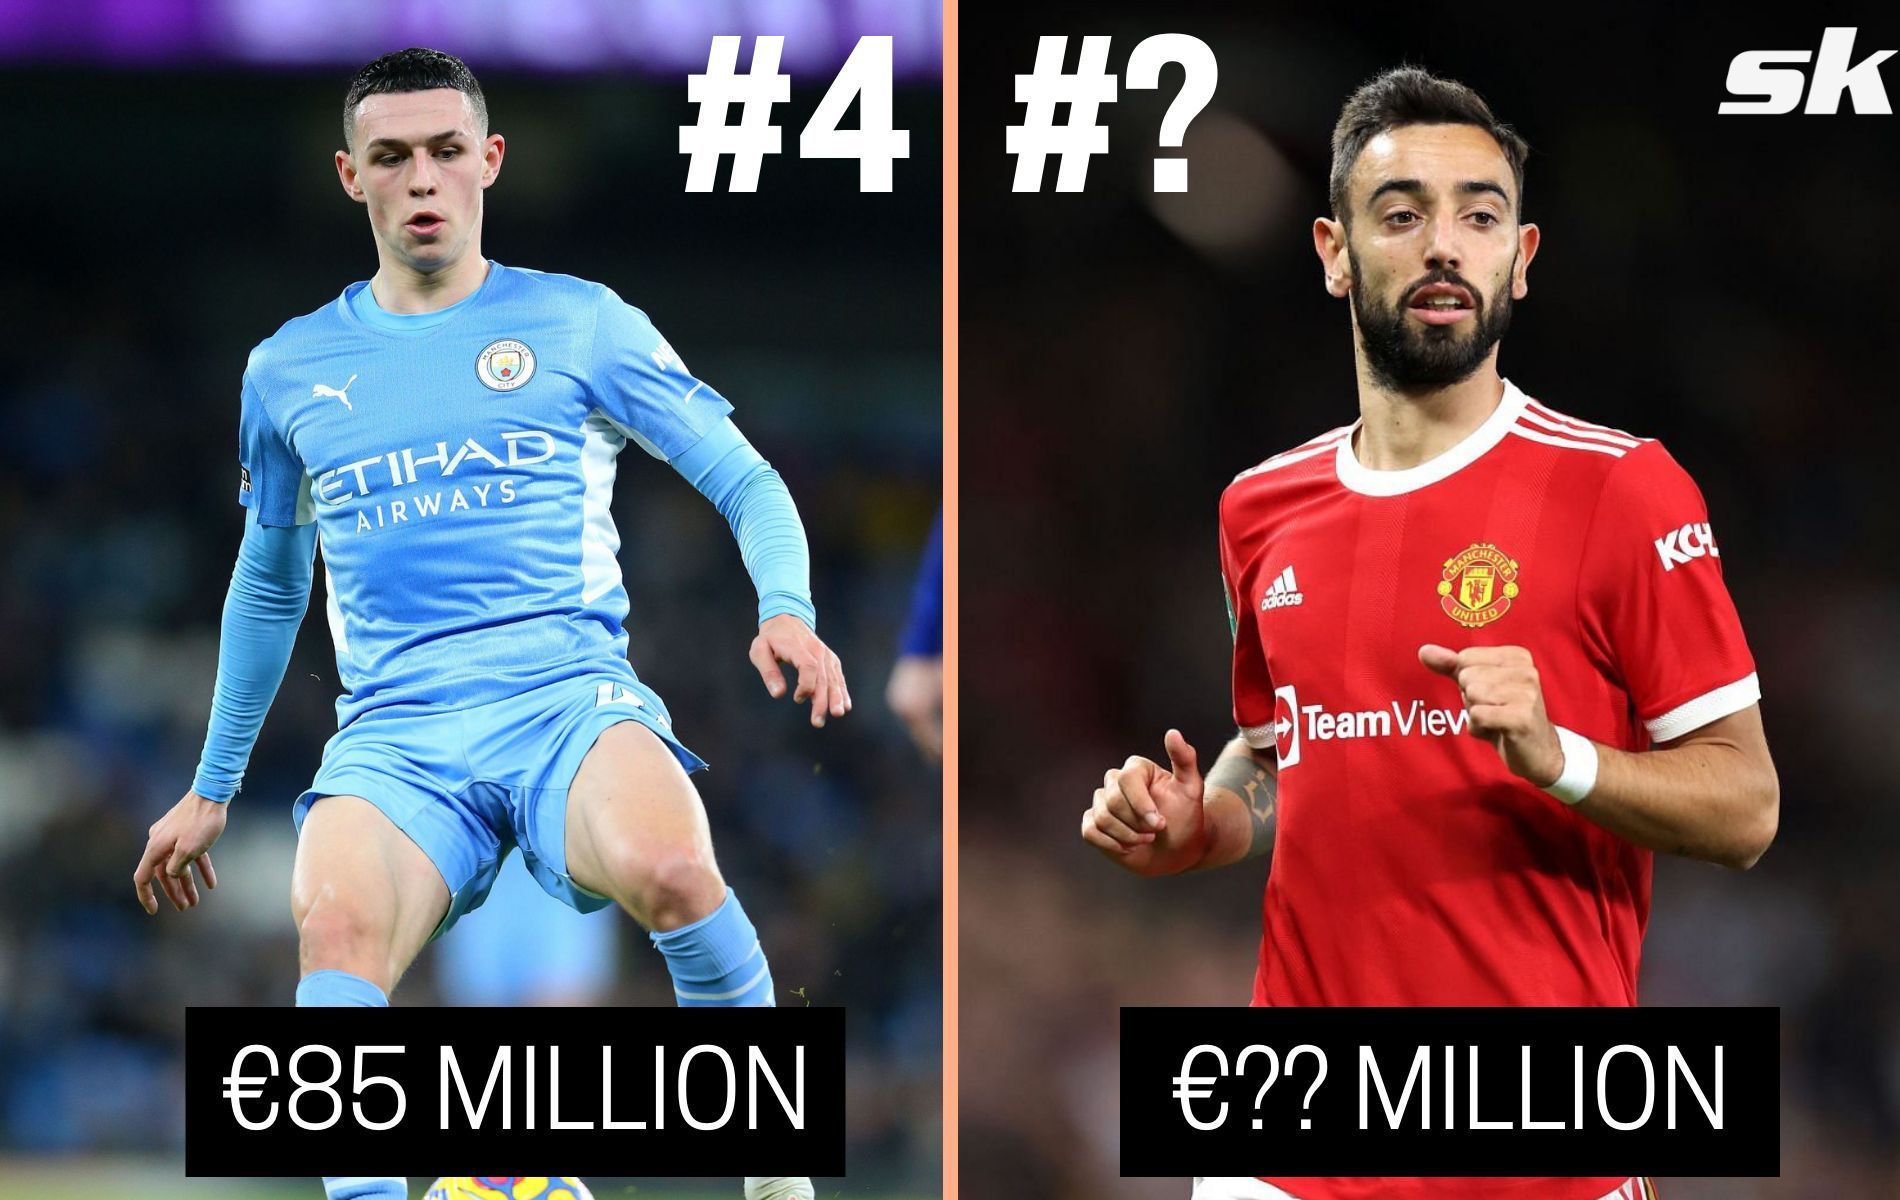 The Premier League has some of the best high valued midfielders